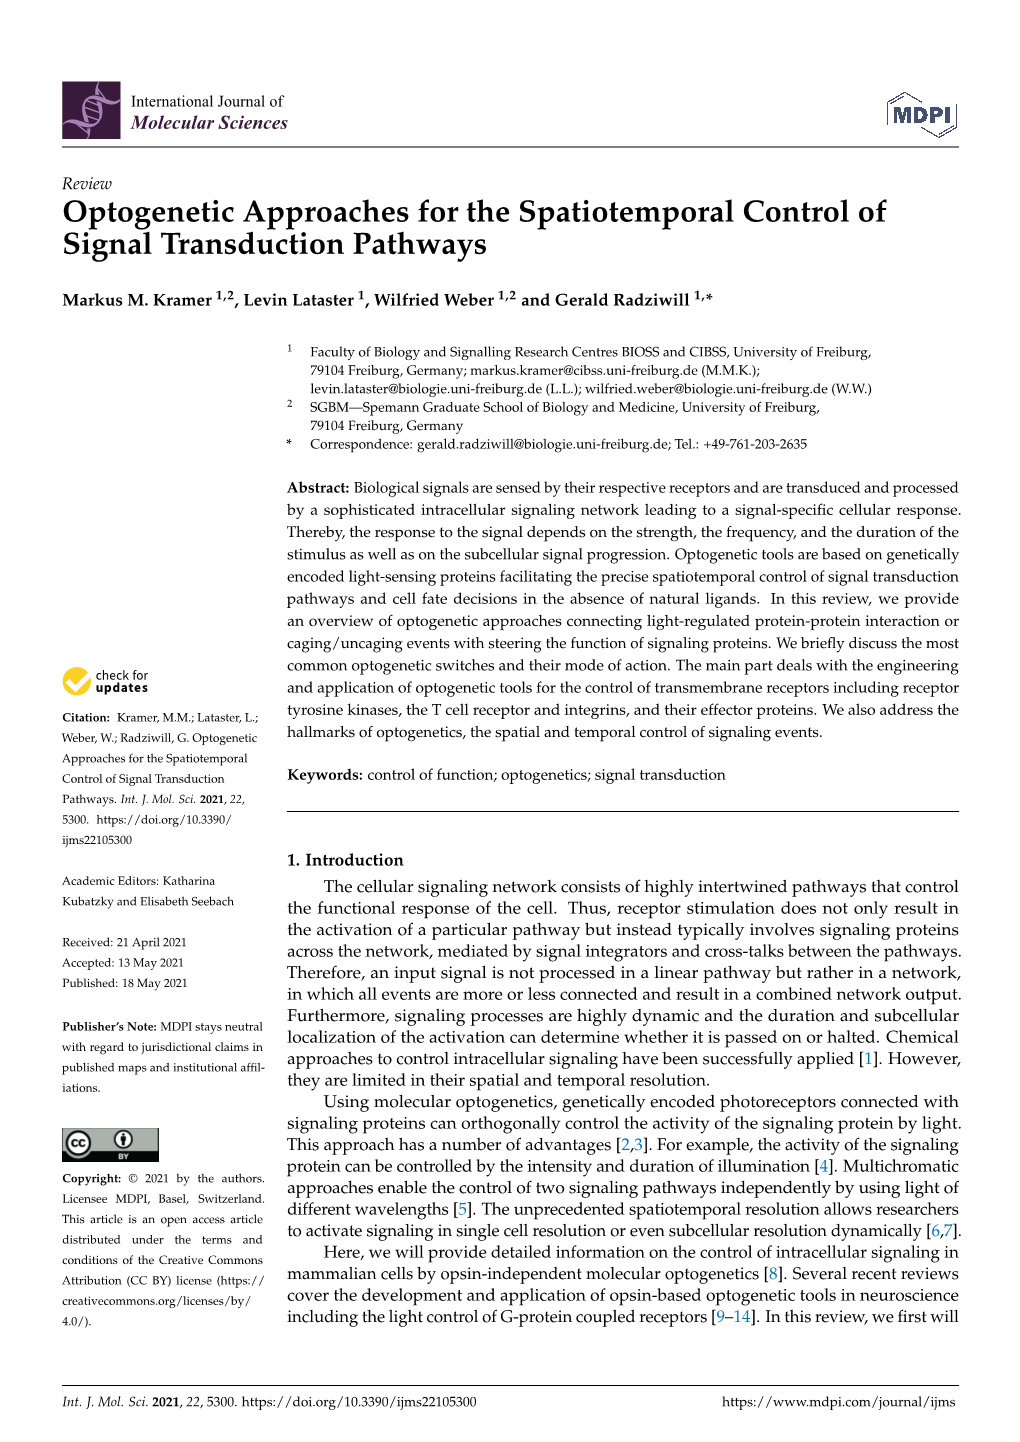 Optogenetic Approaches for the Spatiotemporal Control of Signal Transduction Pathways